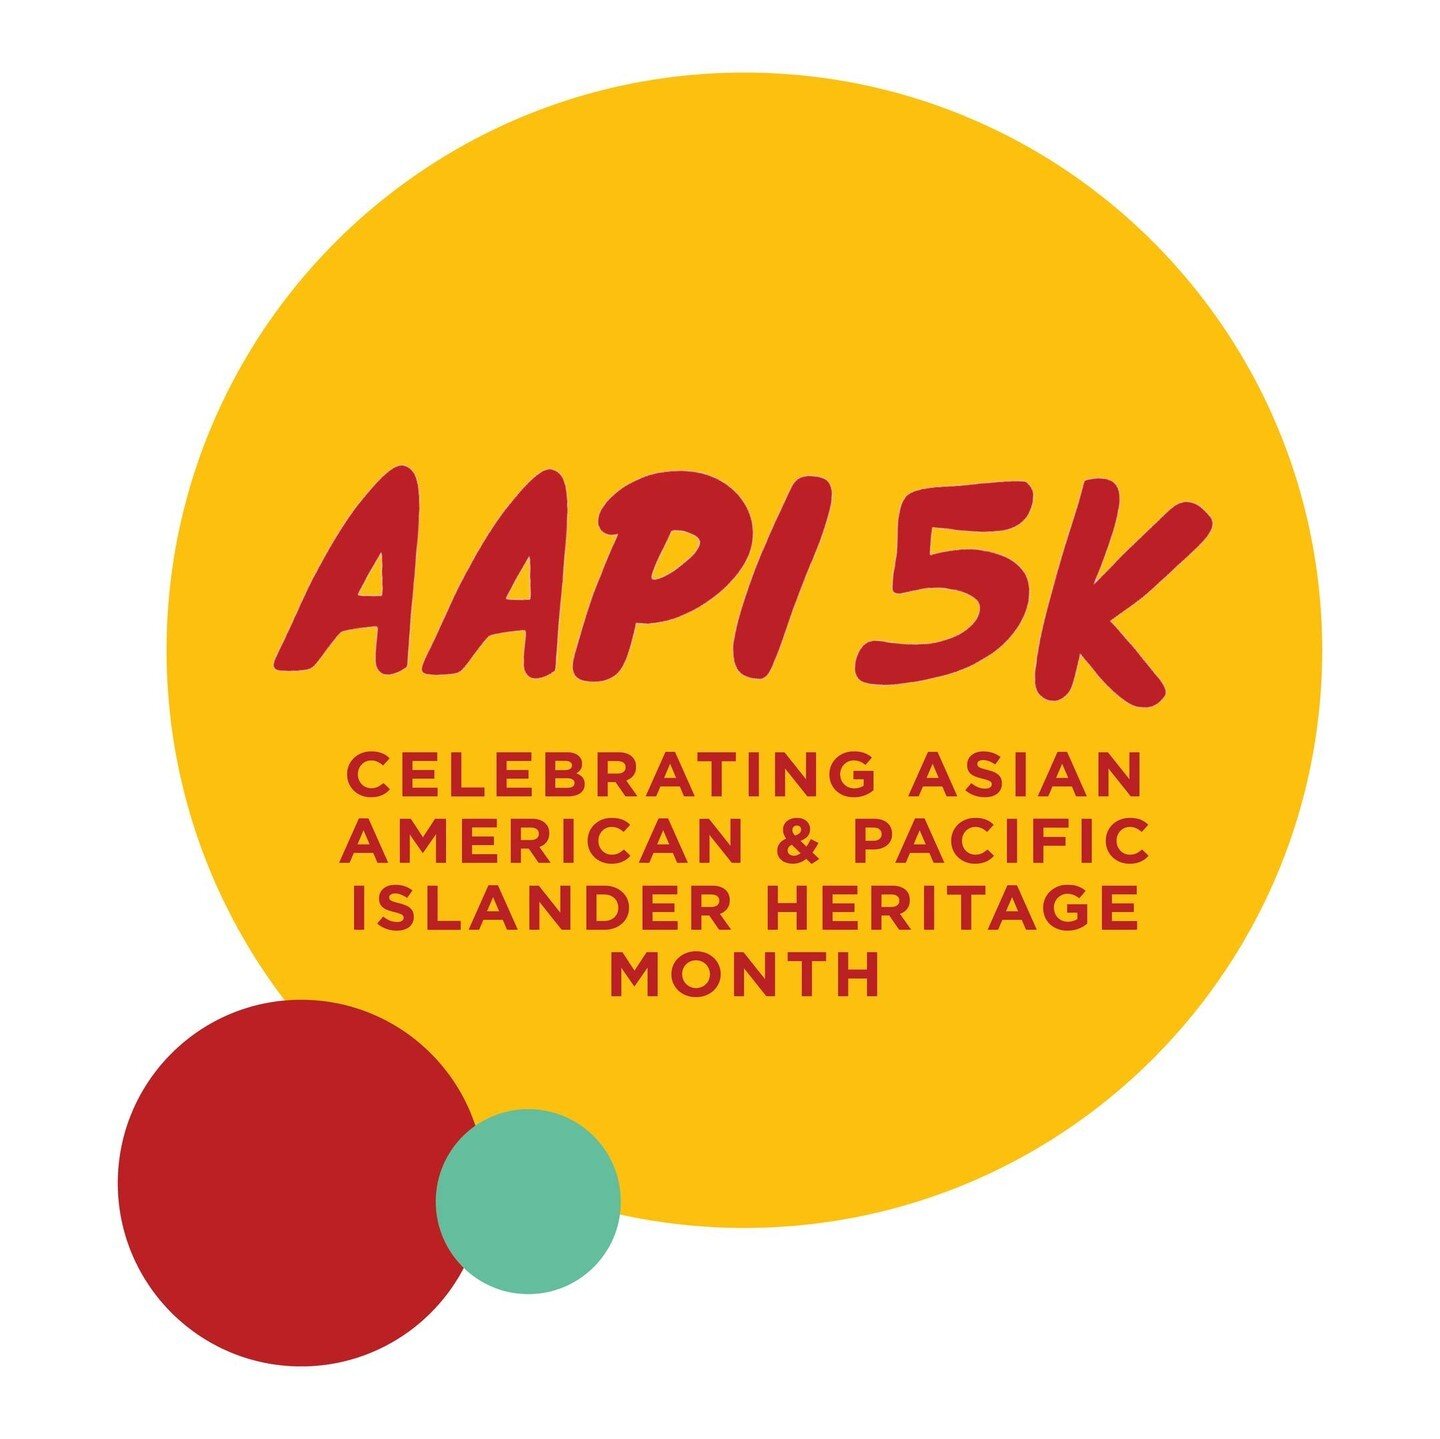 Join us as we celebrate the incredible AAPI community and the Asian American and Pacific Islander Heritage Month!⁠
⁠
The AAPI 5K will take place on May 18th at 9:00 am in South Boston. Visit aapi5k.org for more information on registration and race de